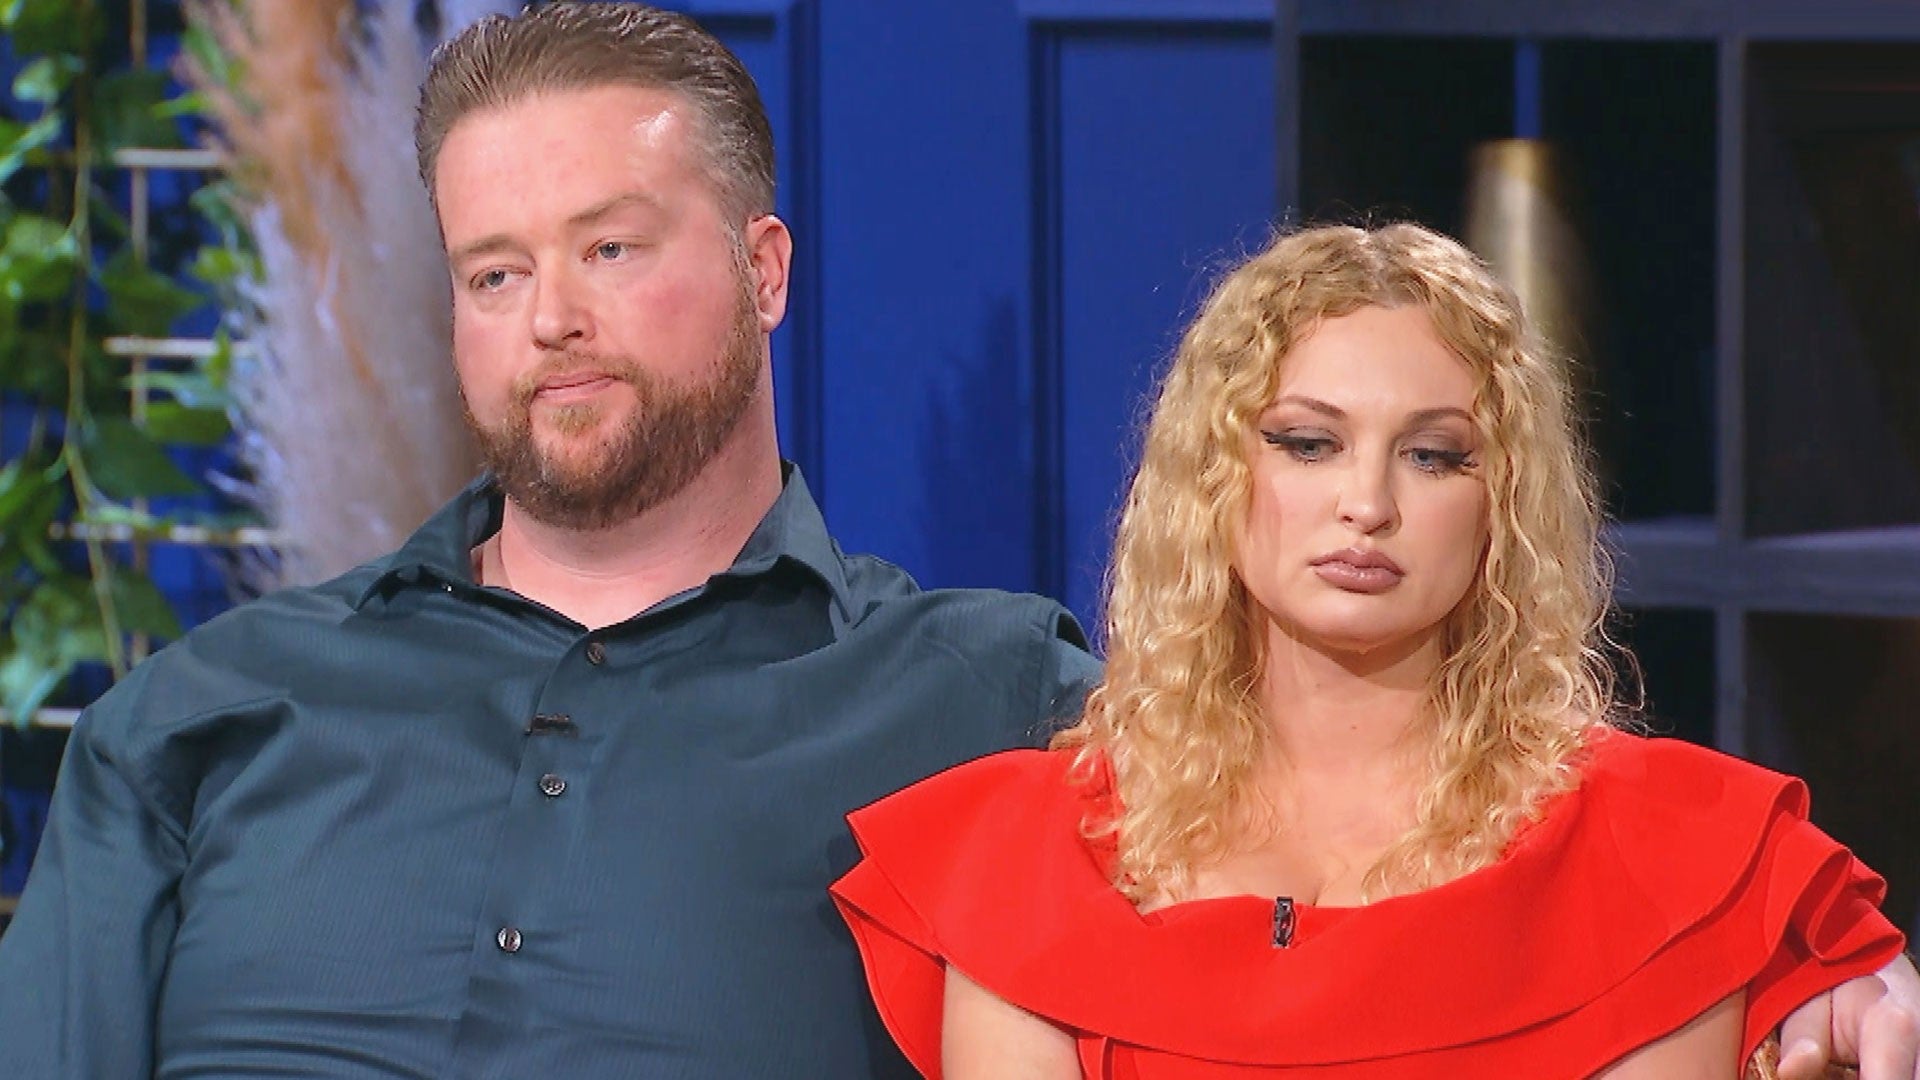 Is The '90 Day Fiancé' TellAll a Nadir in the Show? Fans Seem to Think So